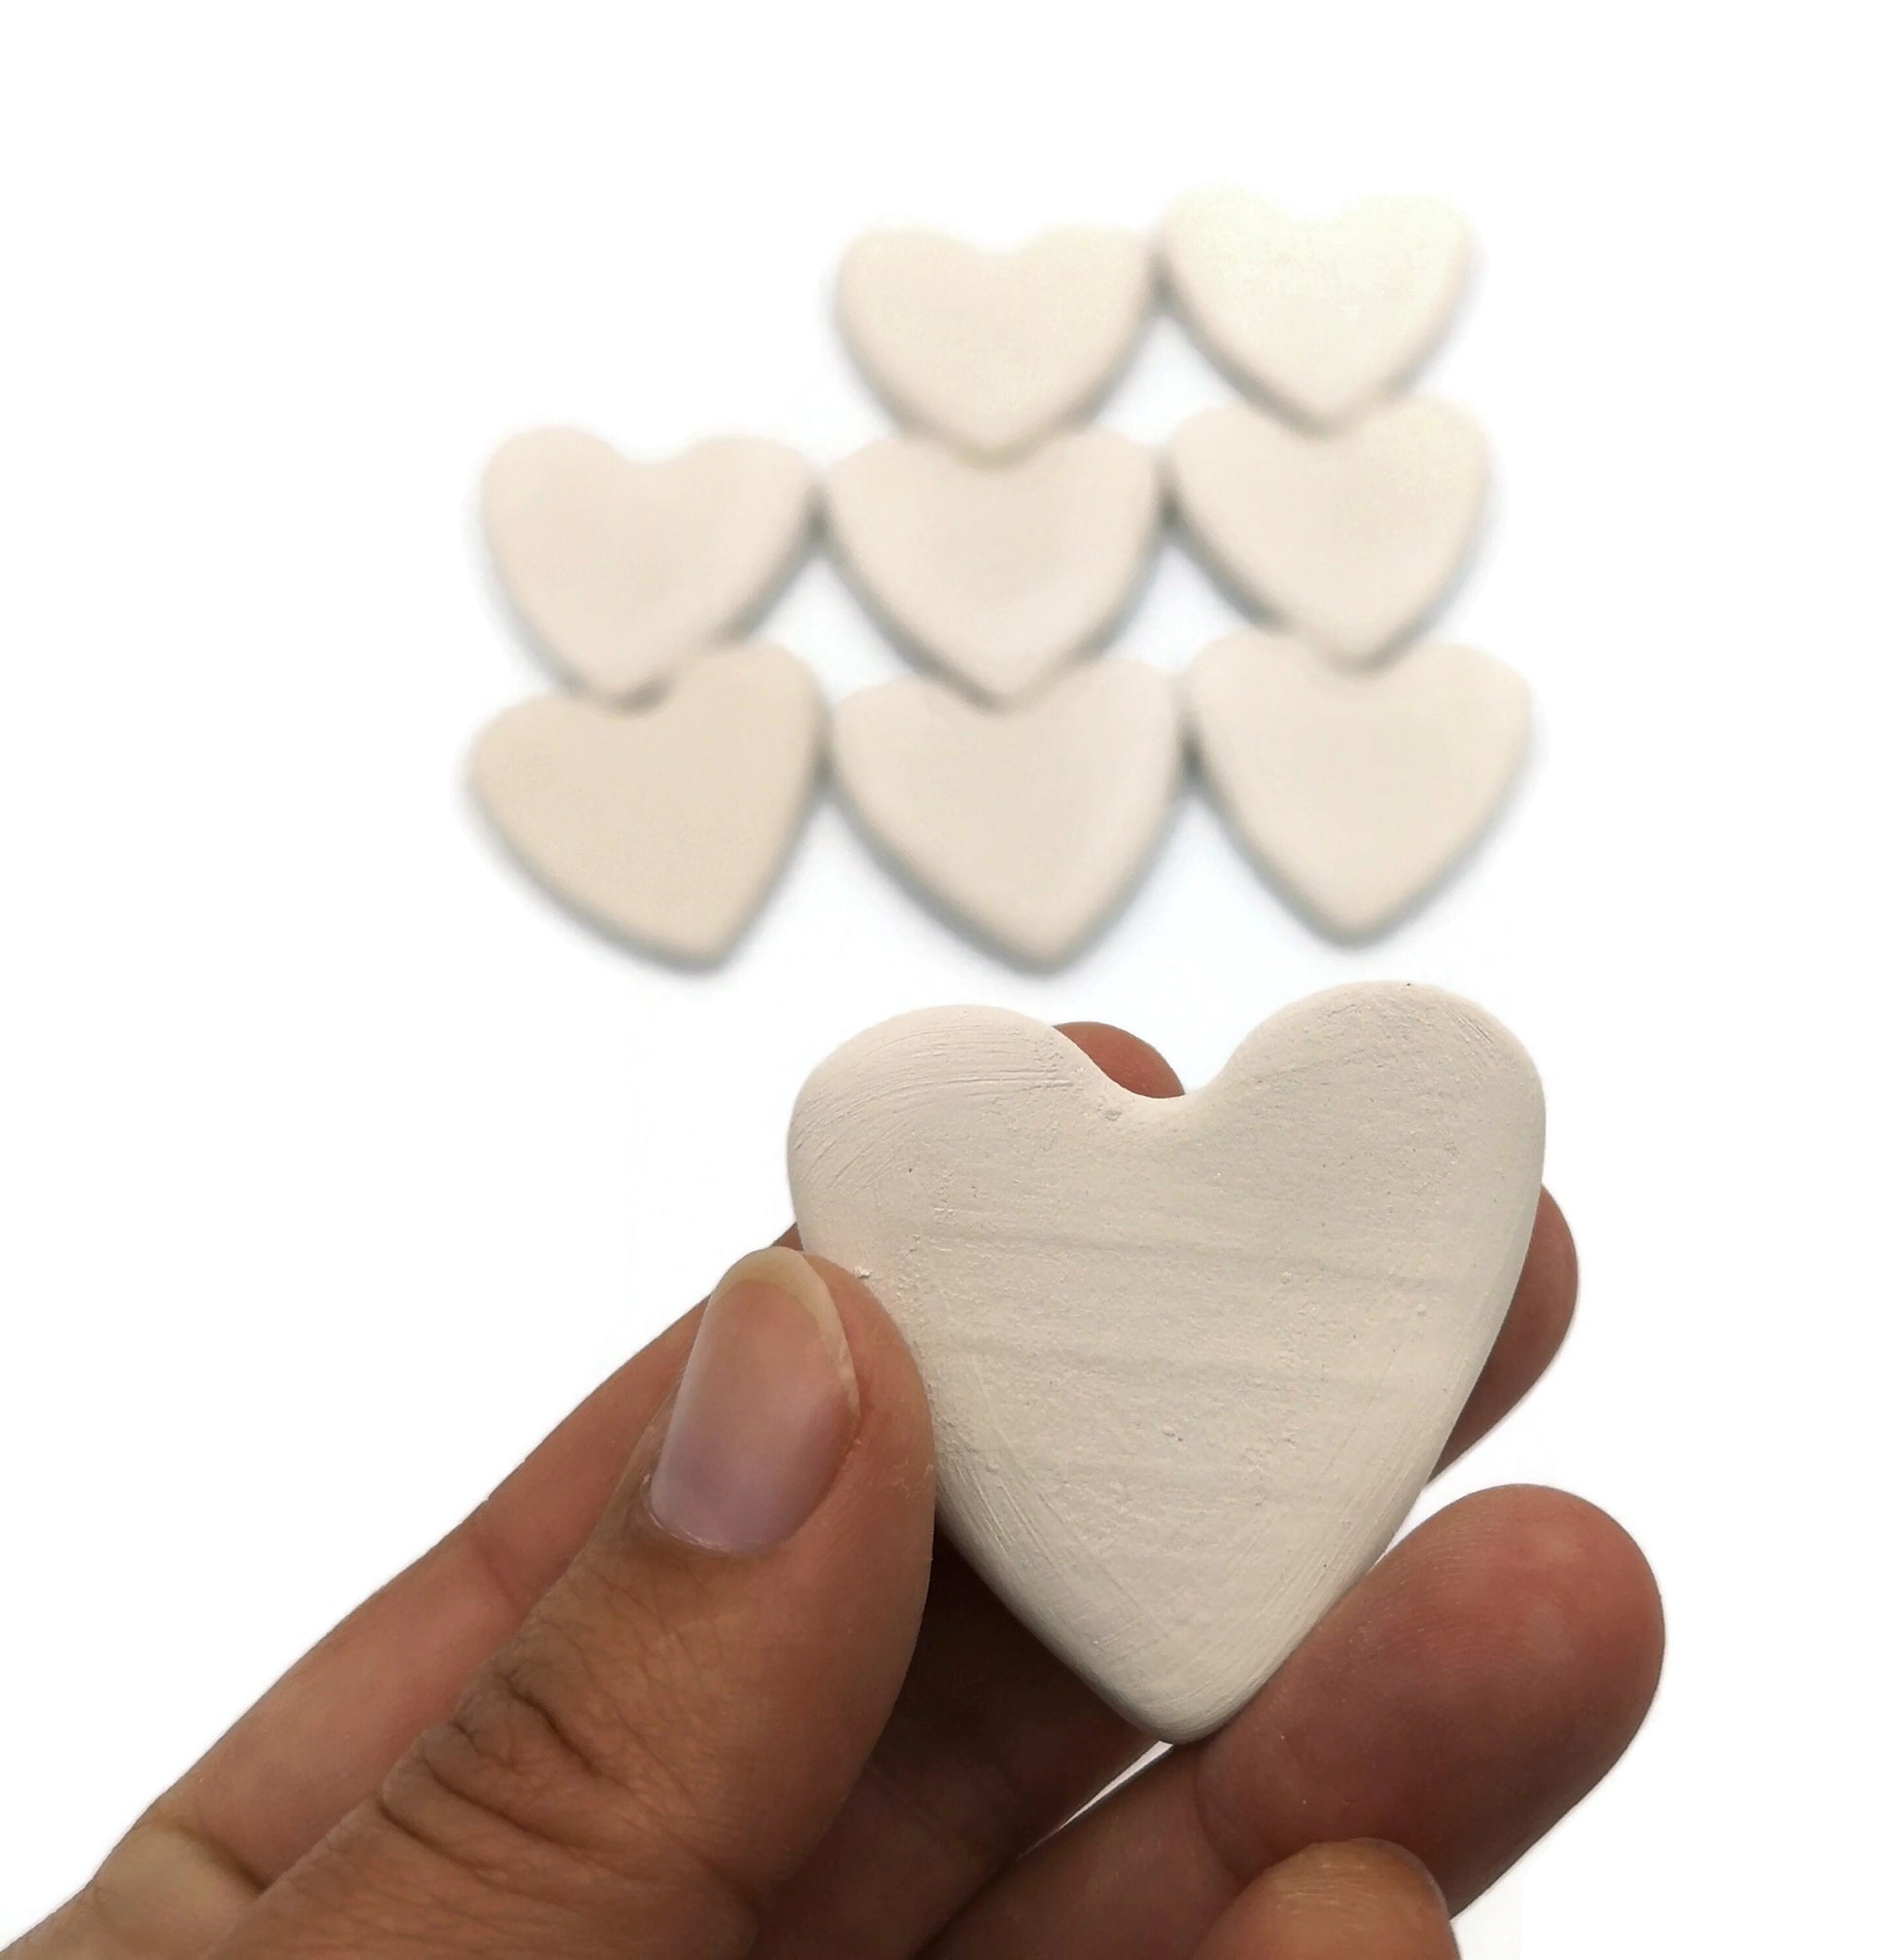 Set Of 9 Handmade Ceramic Bisque Tile Heart Shaped, Wedding Favours mosaic Tiles, Unpainted Tiny Heart Ready To Paint - Ceramica Ana Rafael